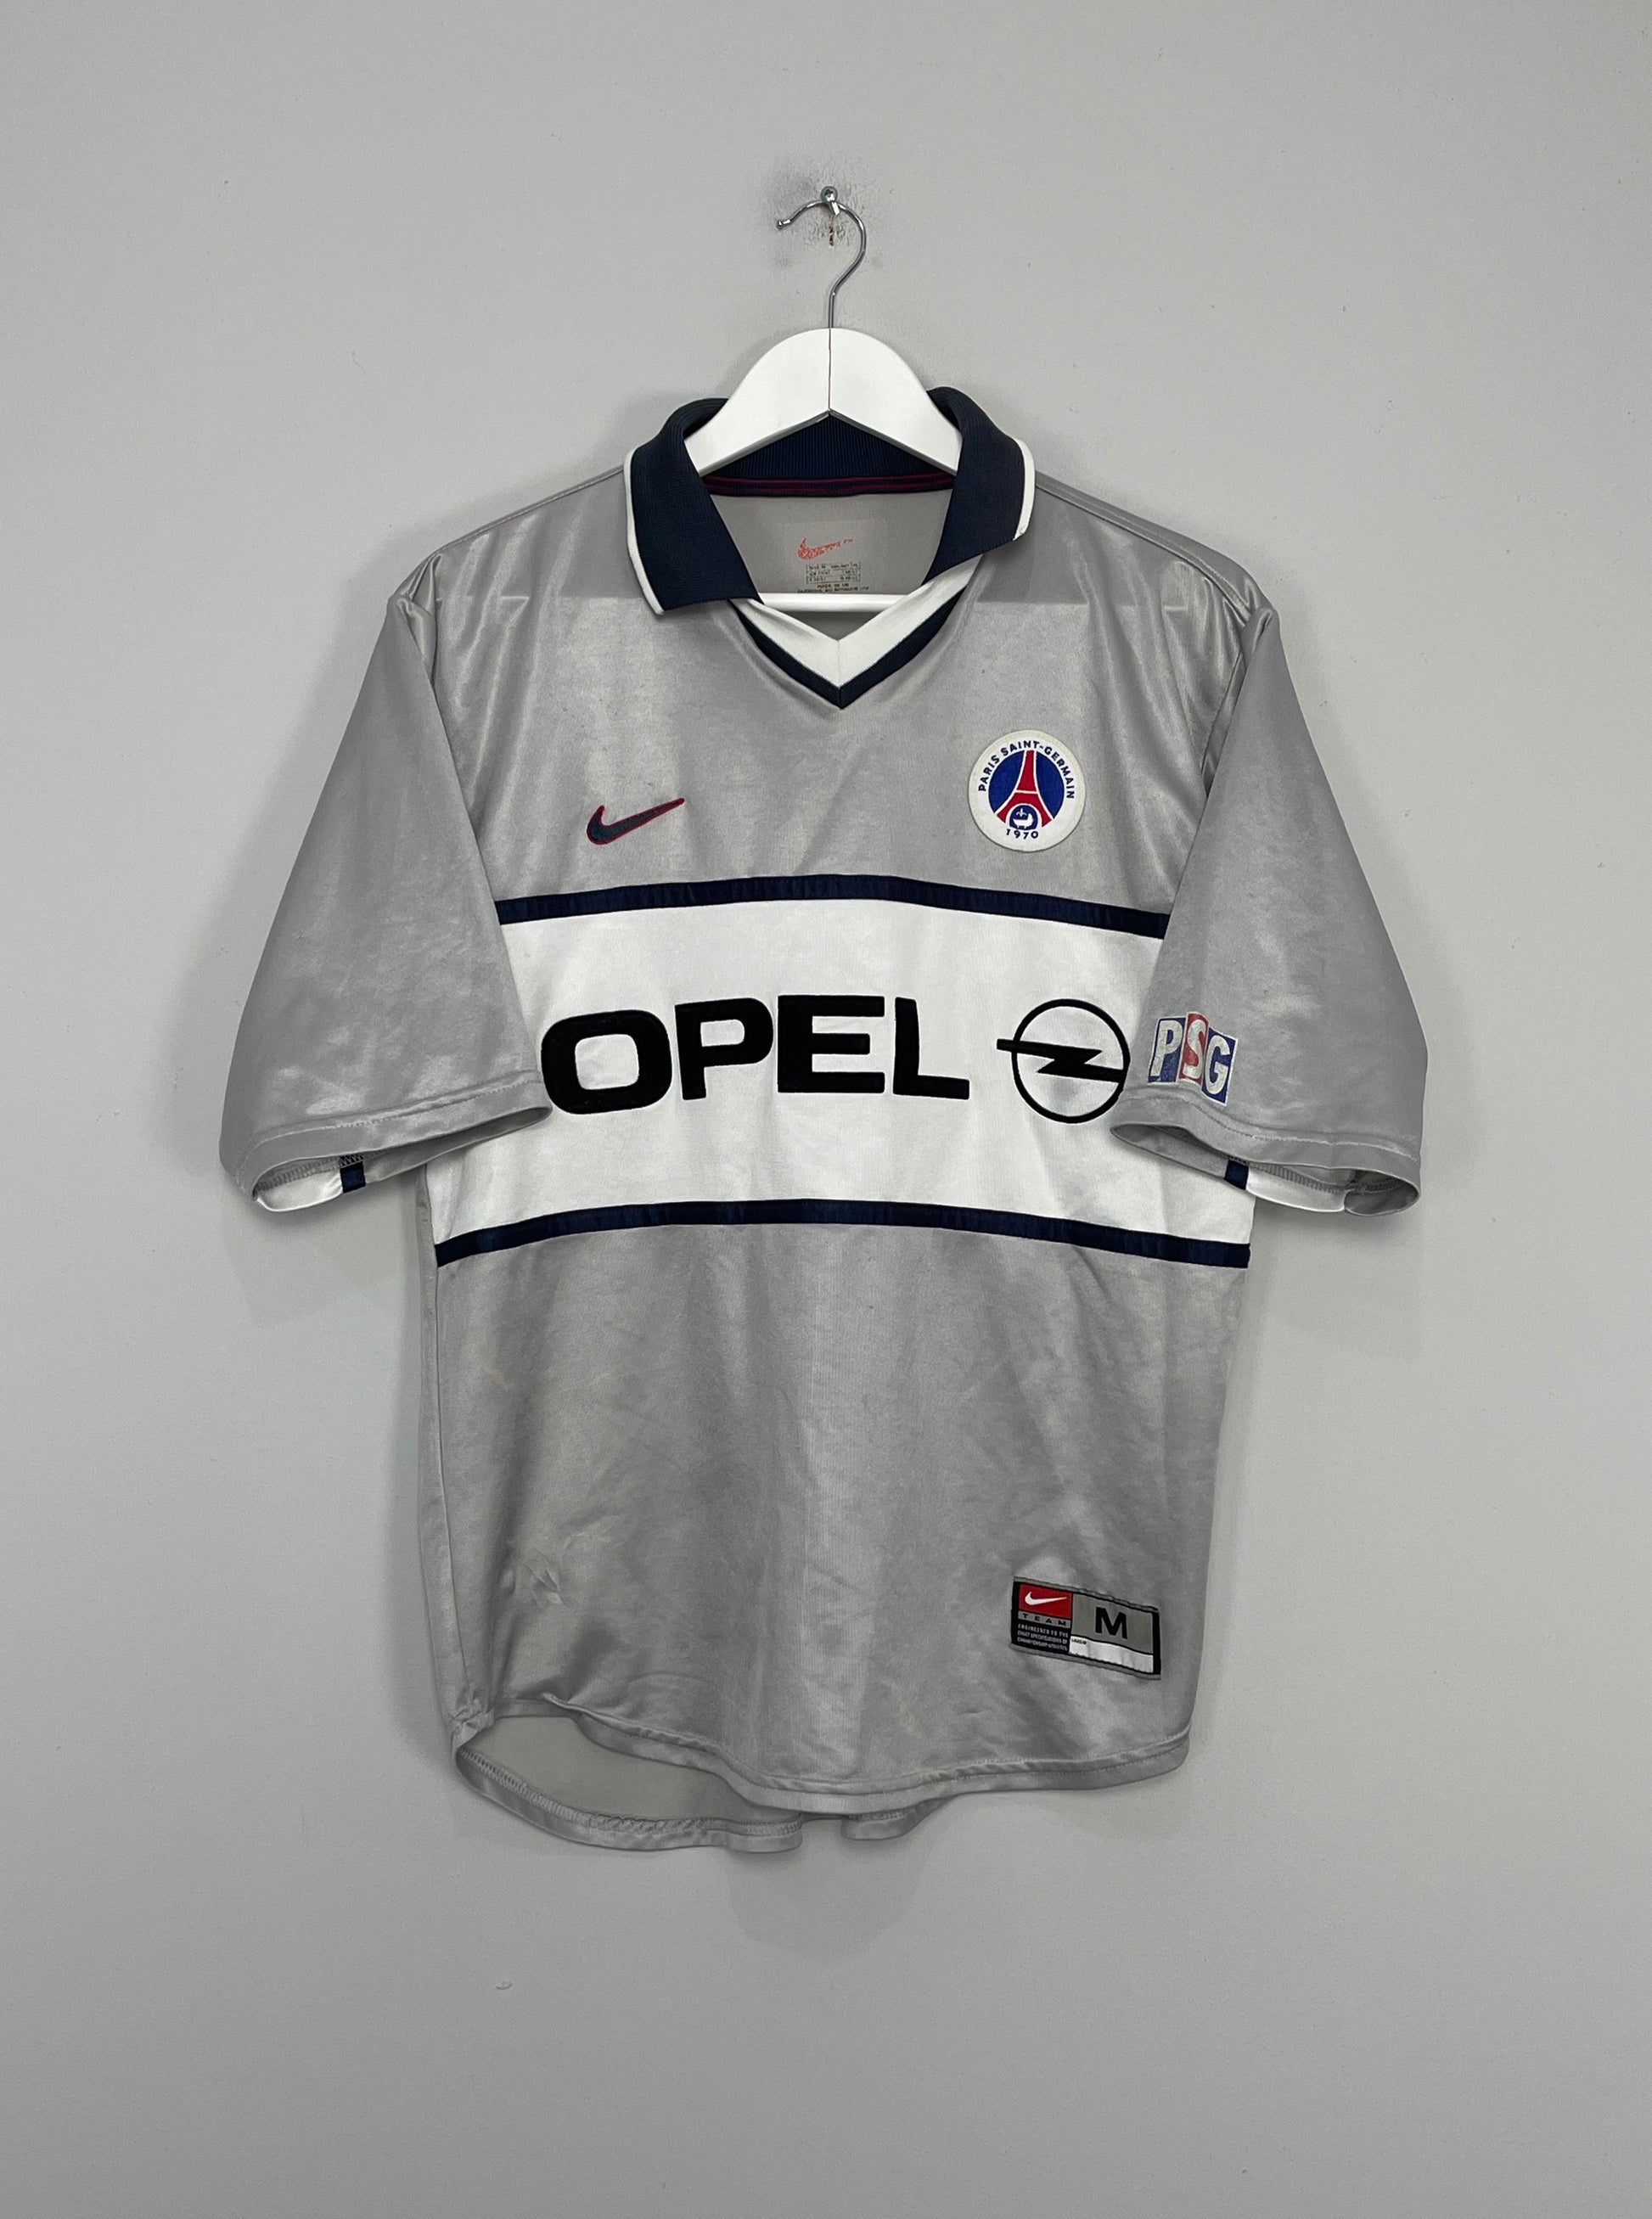 Image of the PSG shirt from the 2000/01 season